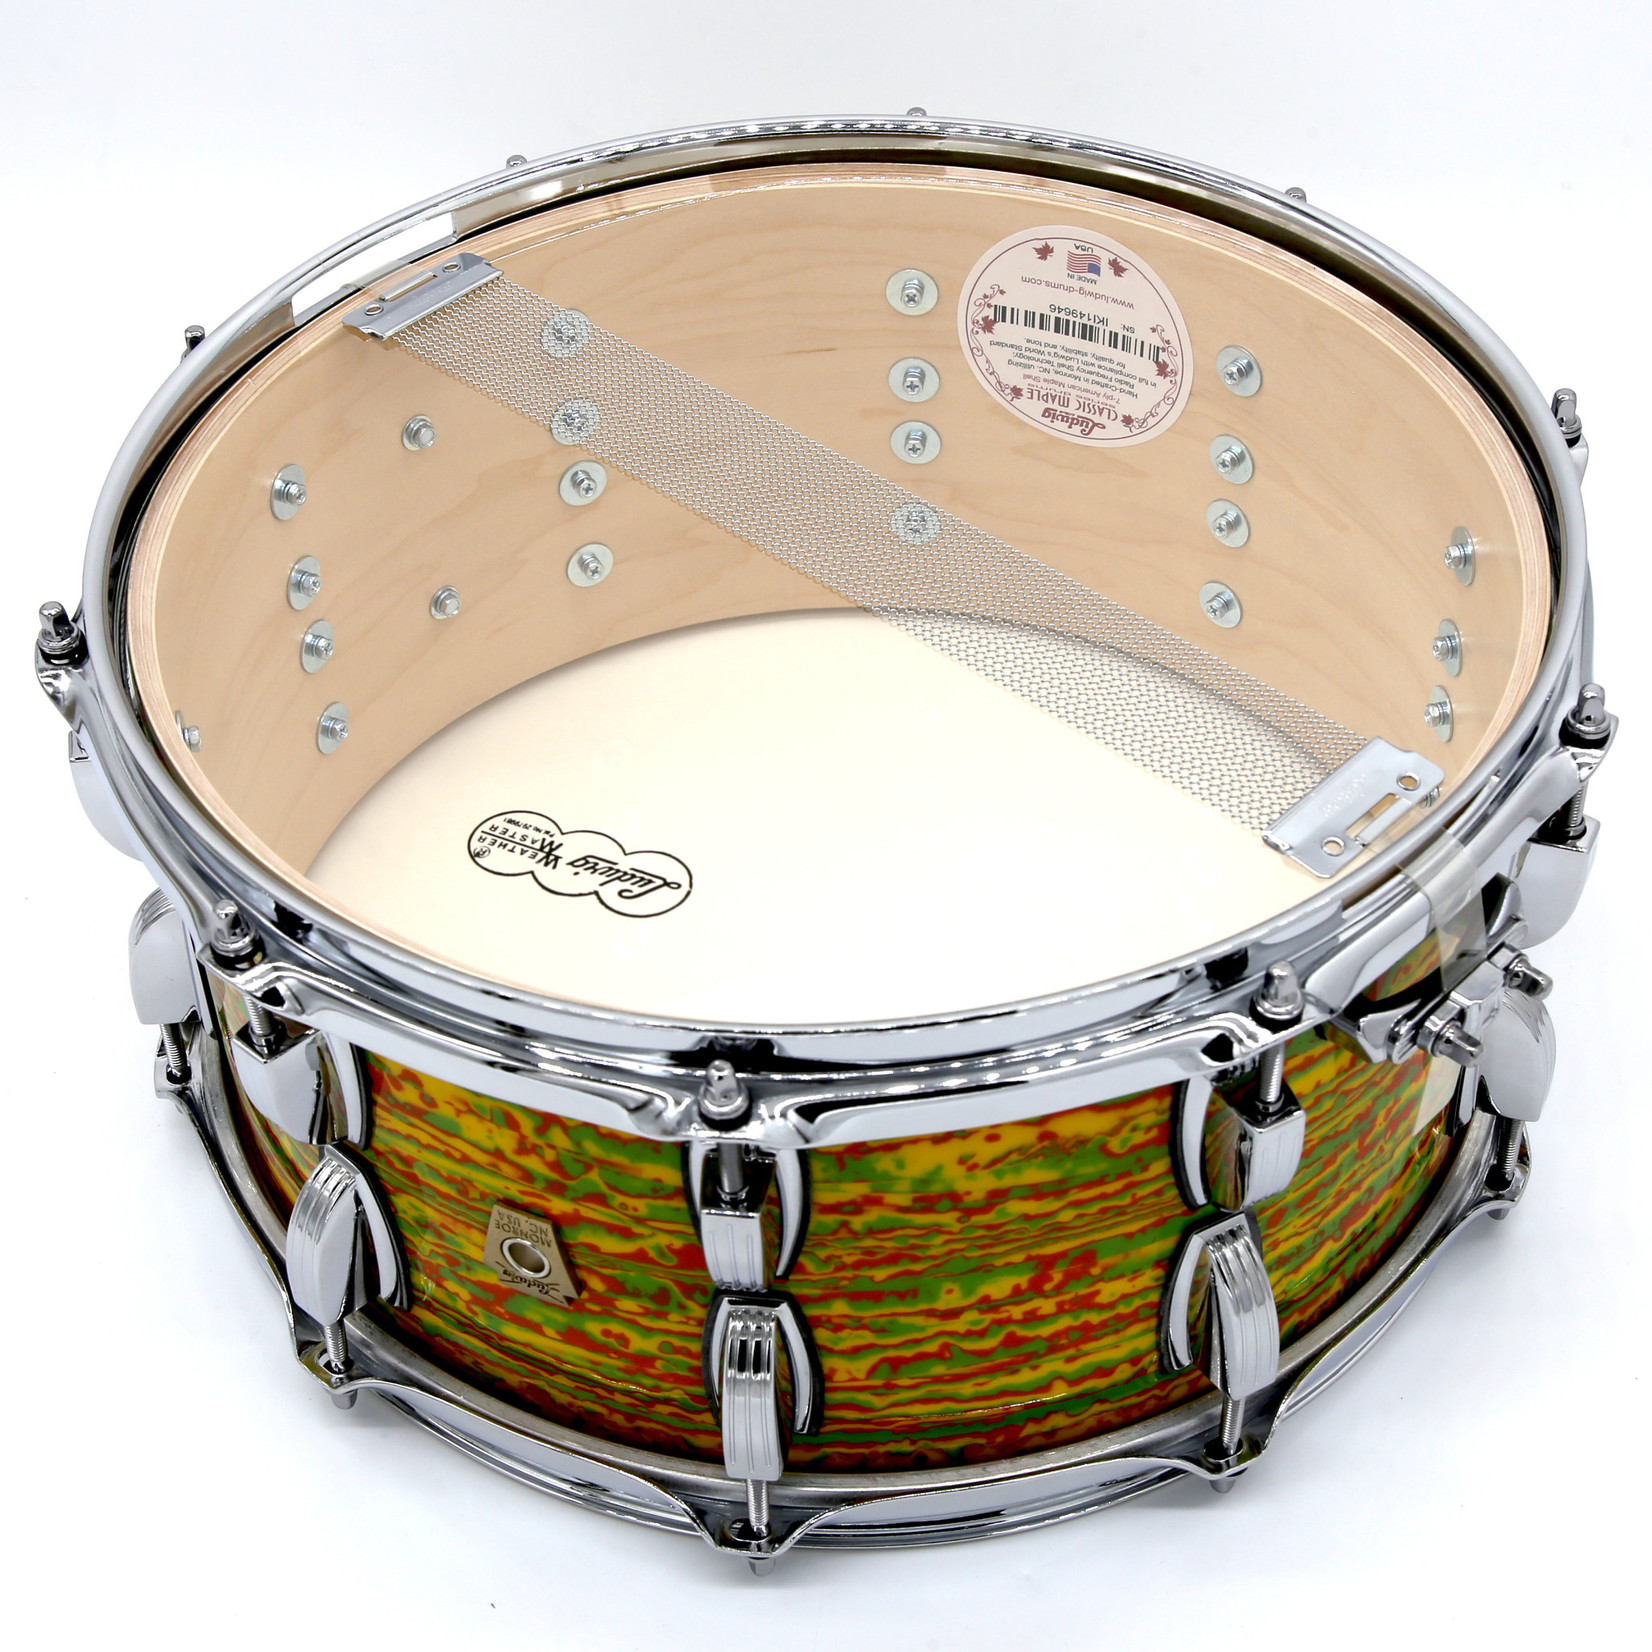 Ludwig Ludwig Classic Maple 6.5x14" Snare (Citrus Mod)